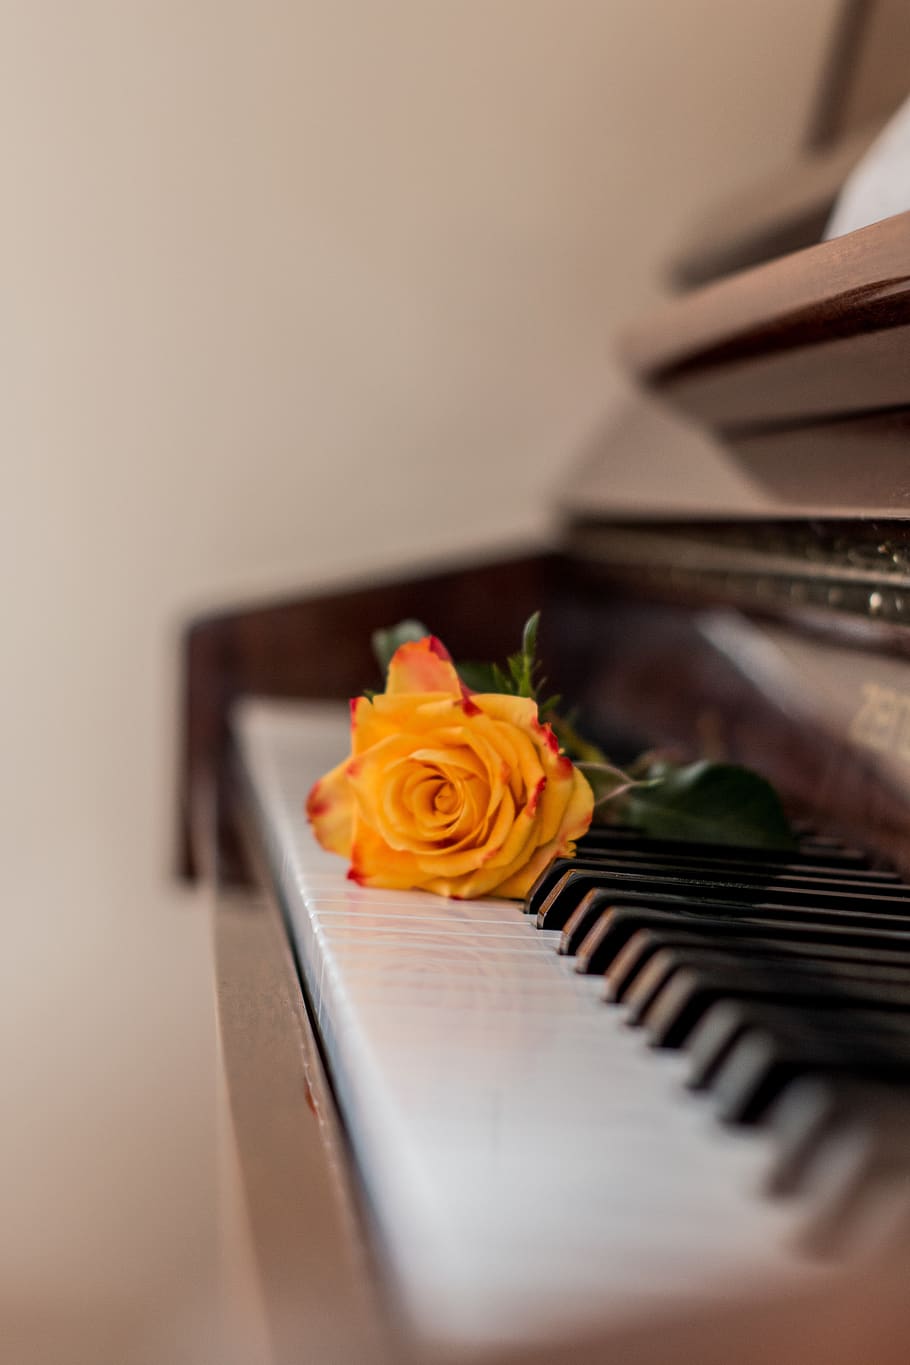 A single rose is placed on top of the piano - Piano